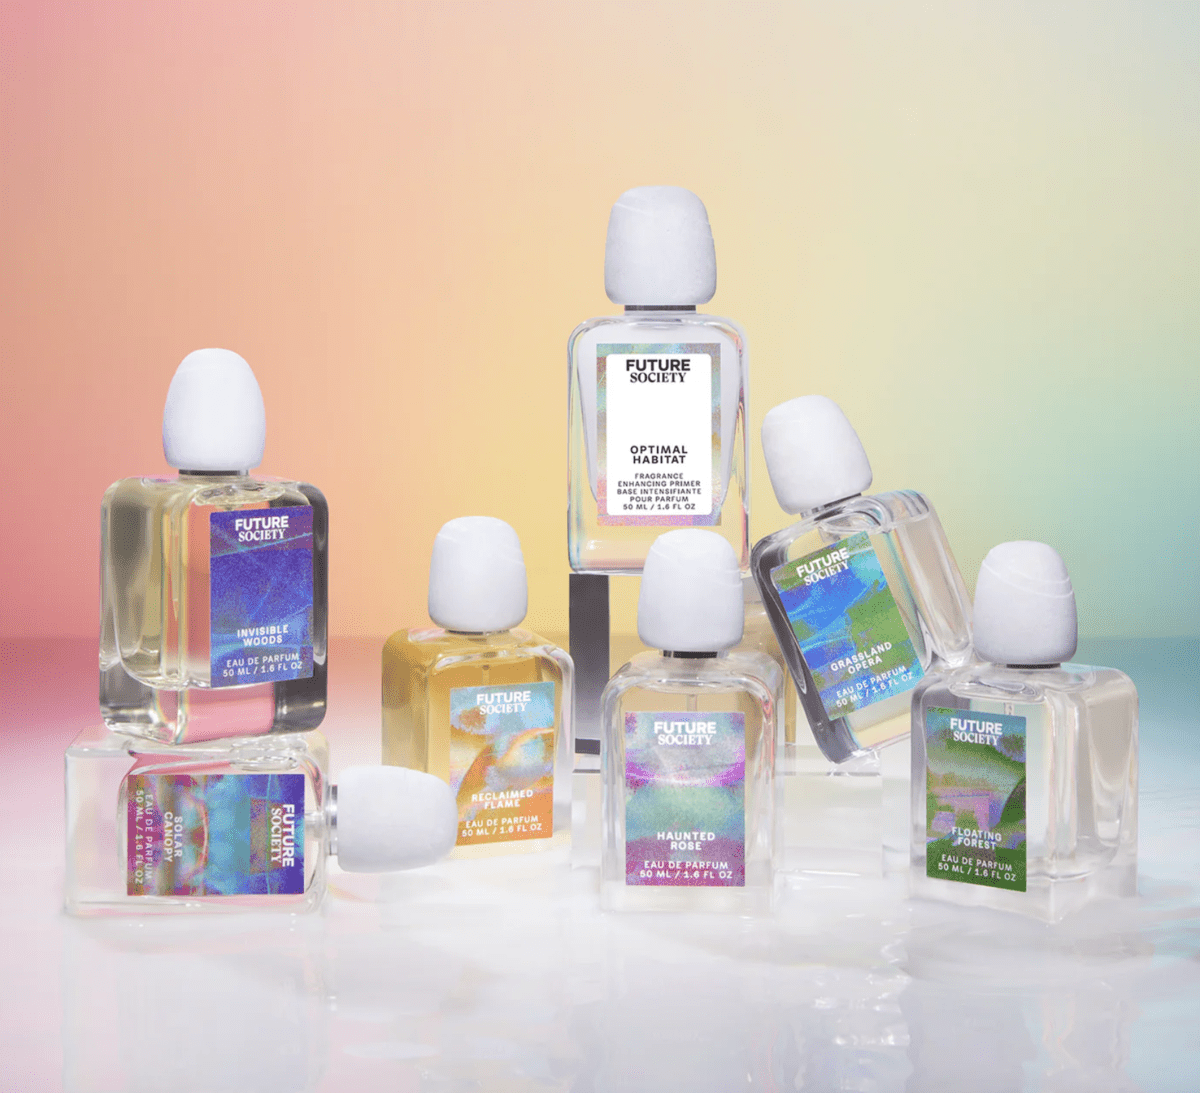 Biotech-driven fragrance brand Future Society recreates the scents of extinct flowers